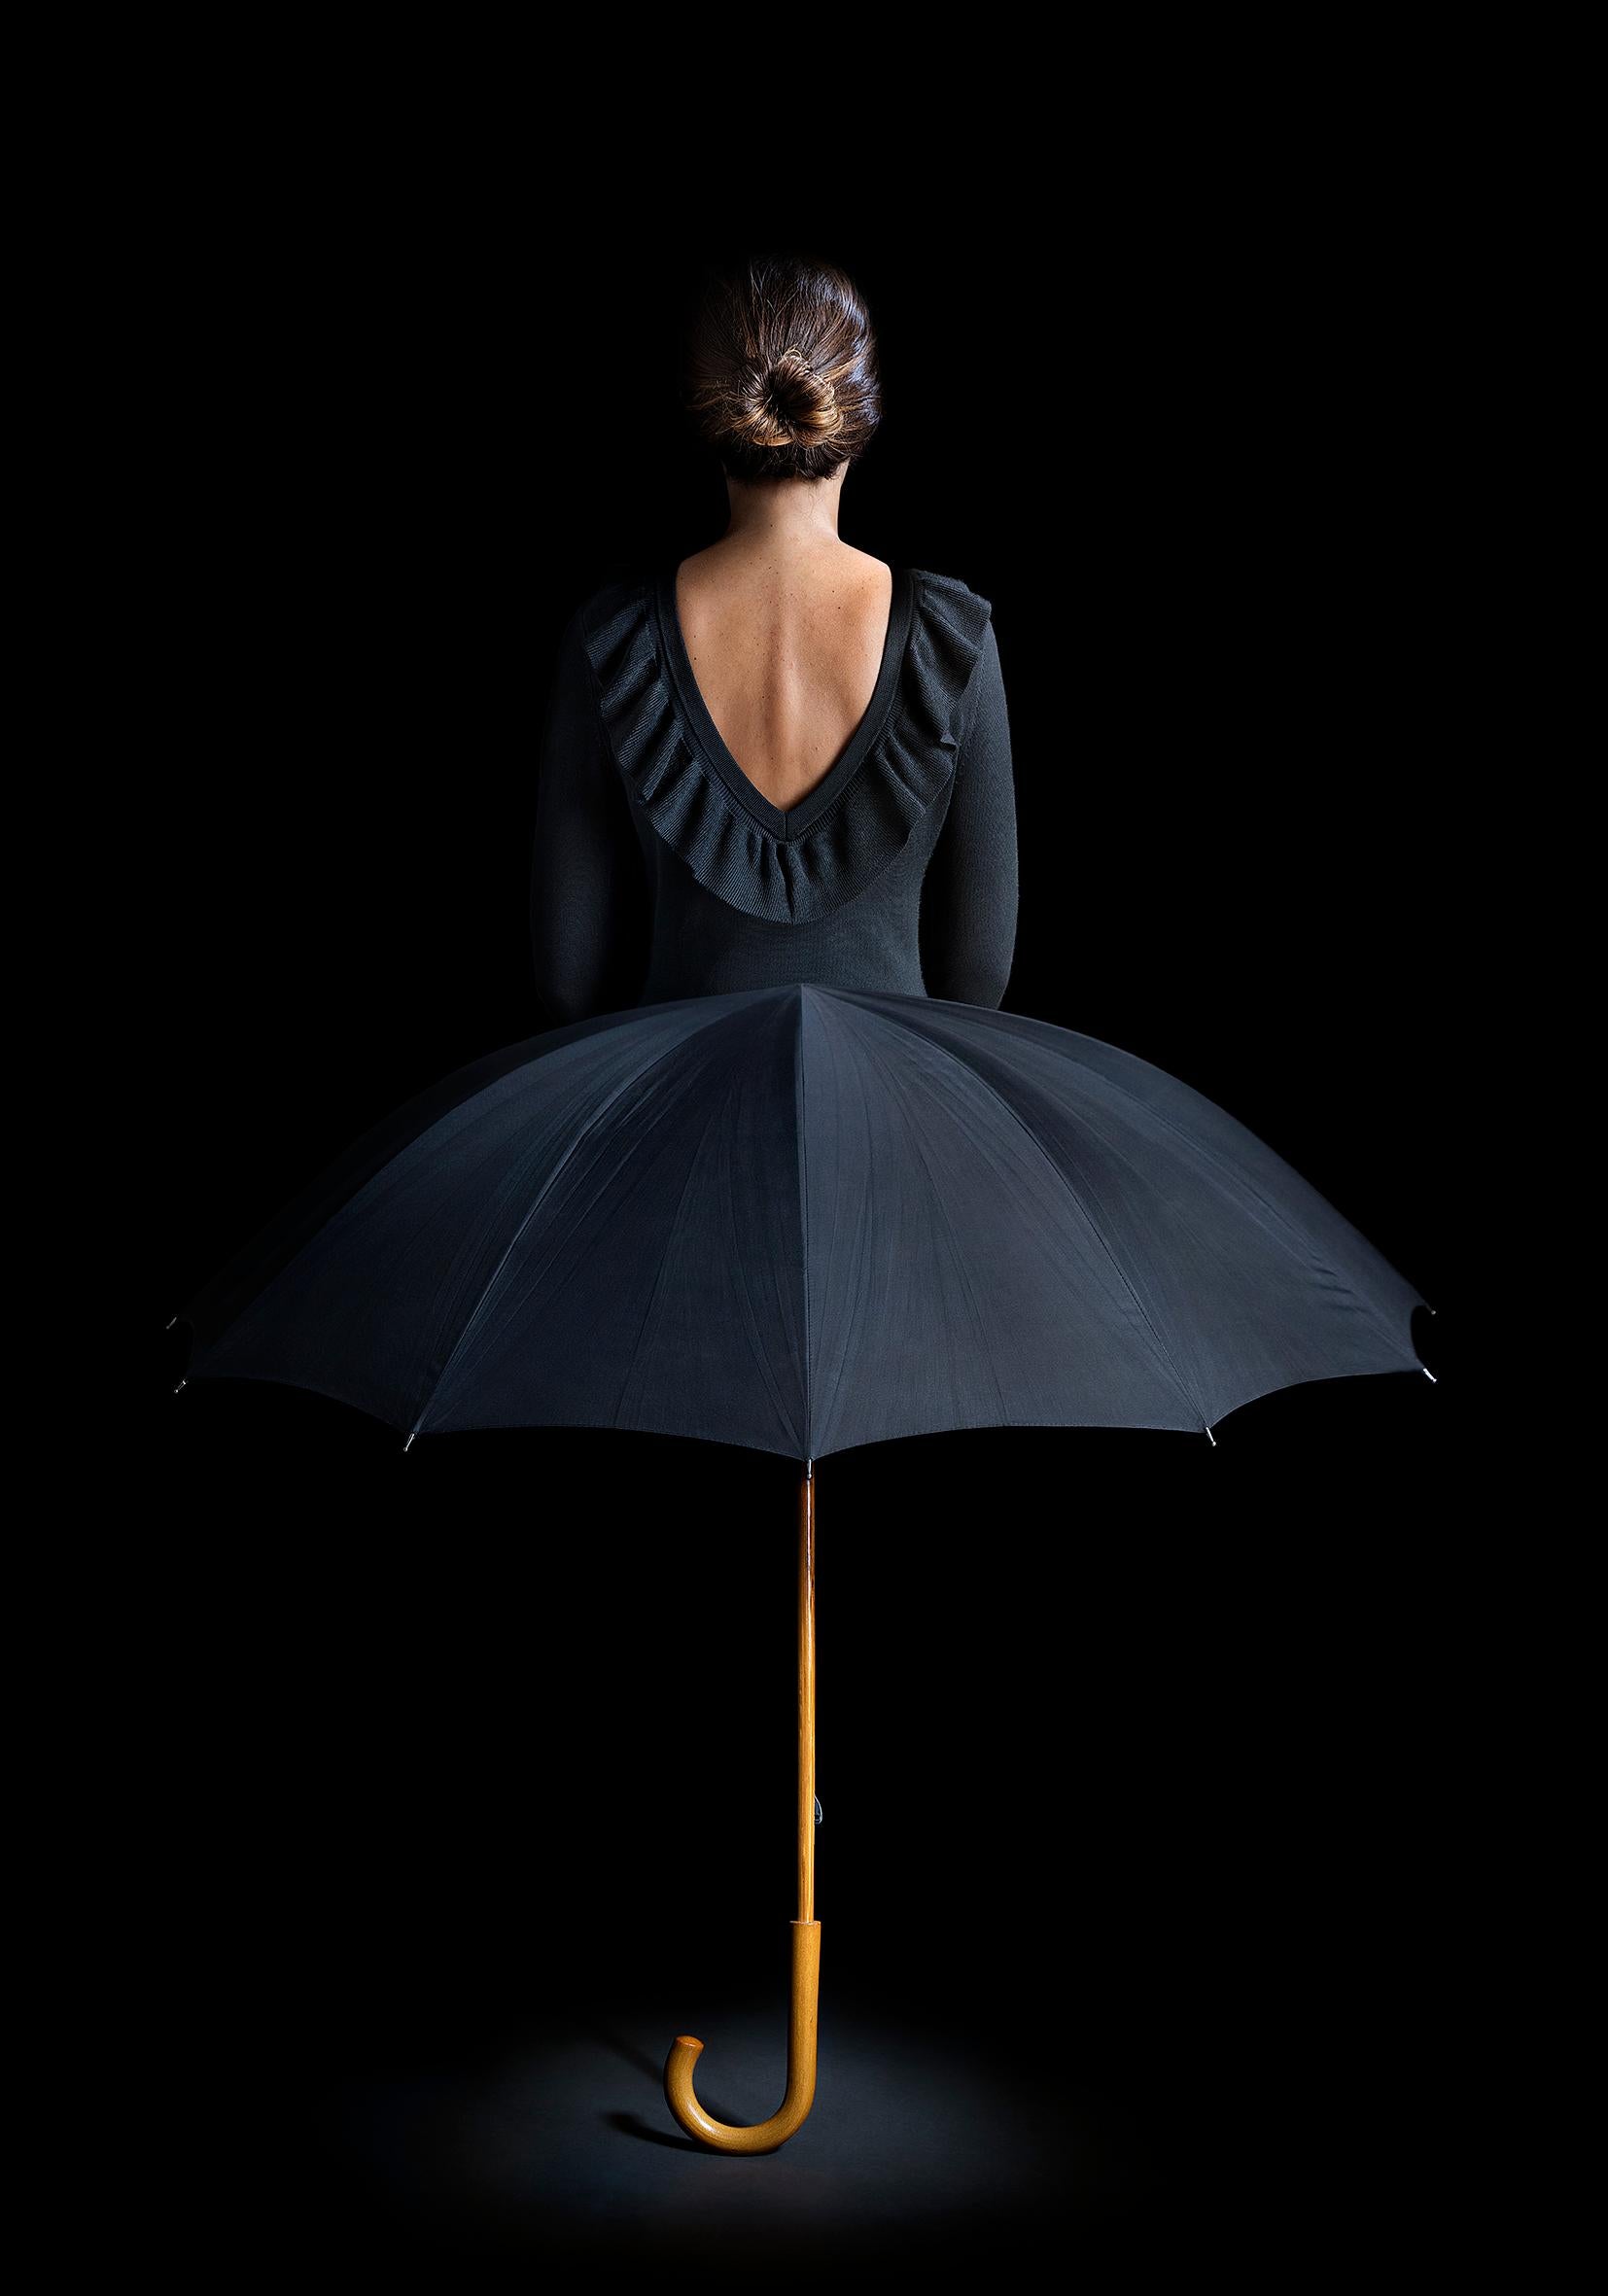 Miguel Vallinas Figurative Photograph - You are the one who protects from the rain